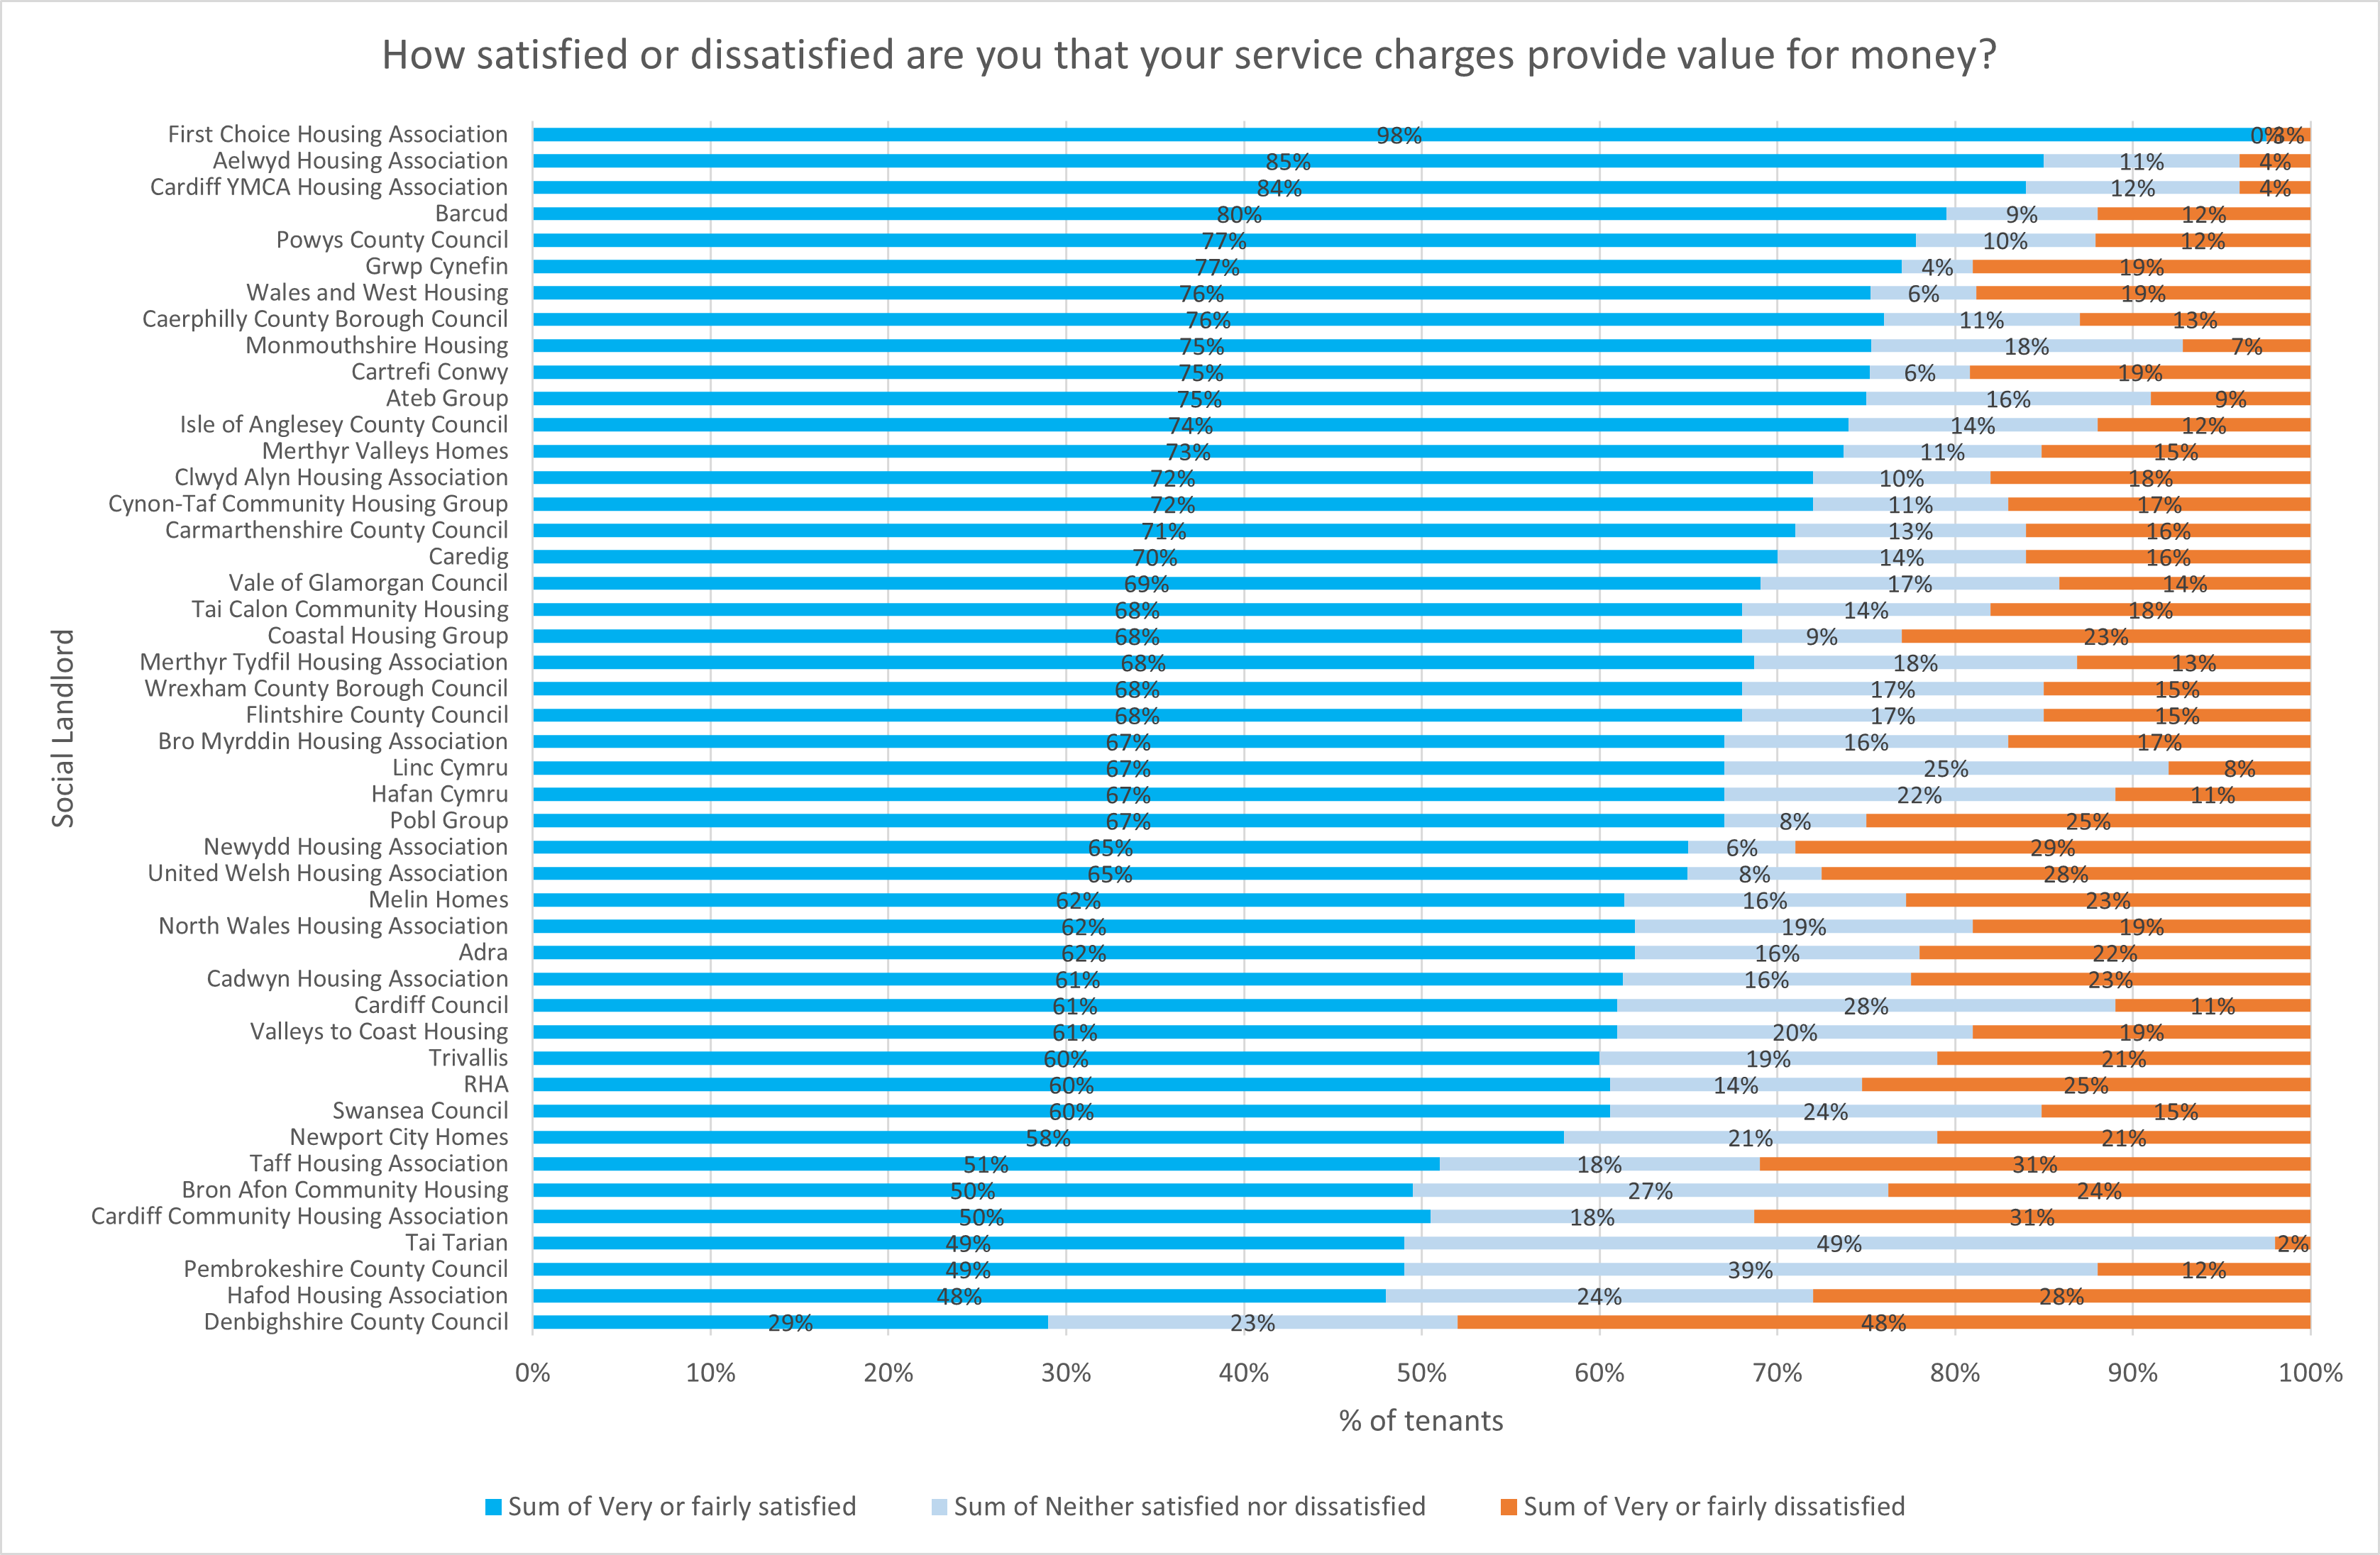 How satisfied or dissatisfied are you that your service charges provide value for money?